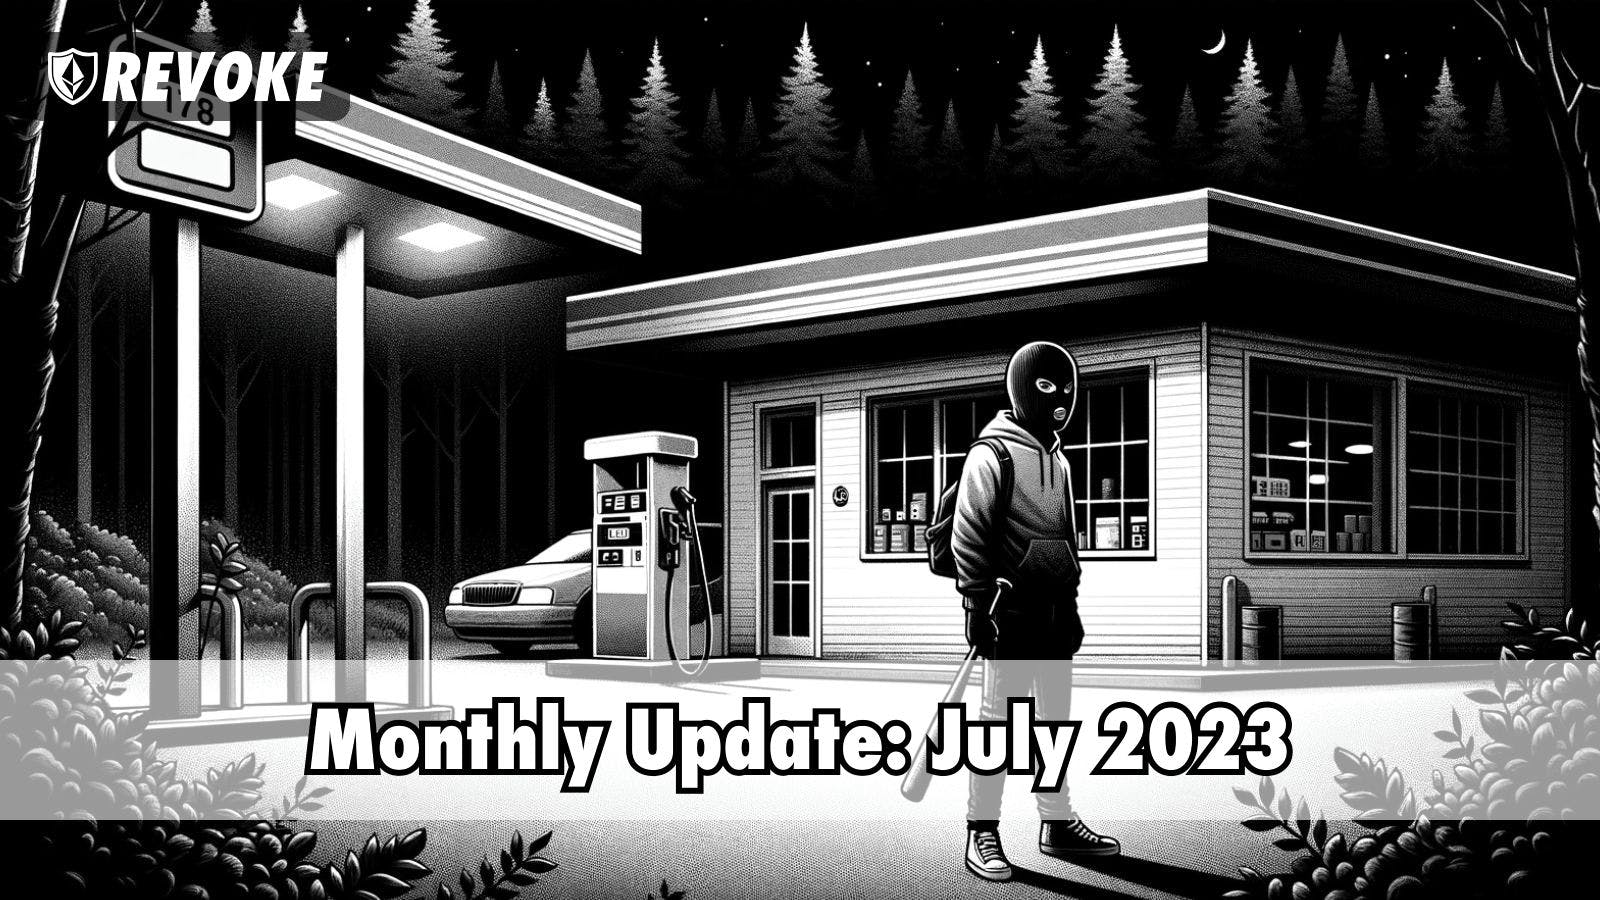 Monthly Update: July 2023 Cover Image